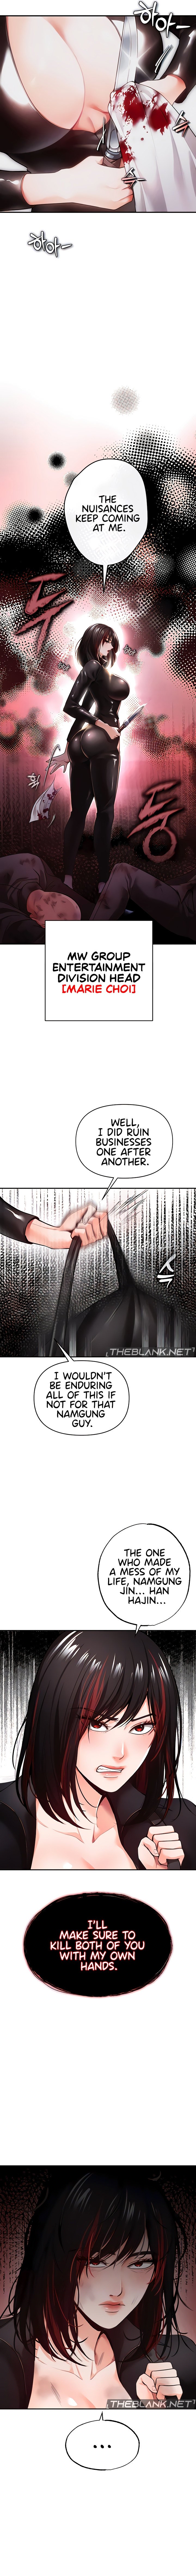 the-real-deal-chap-33-2